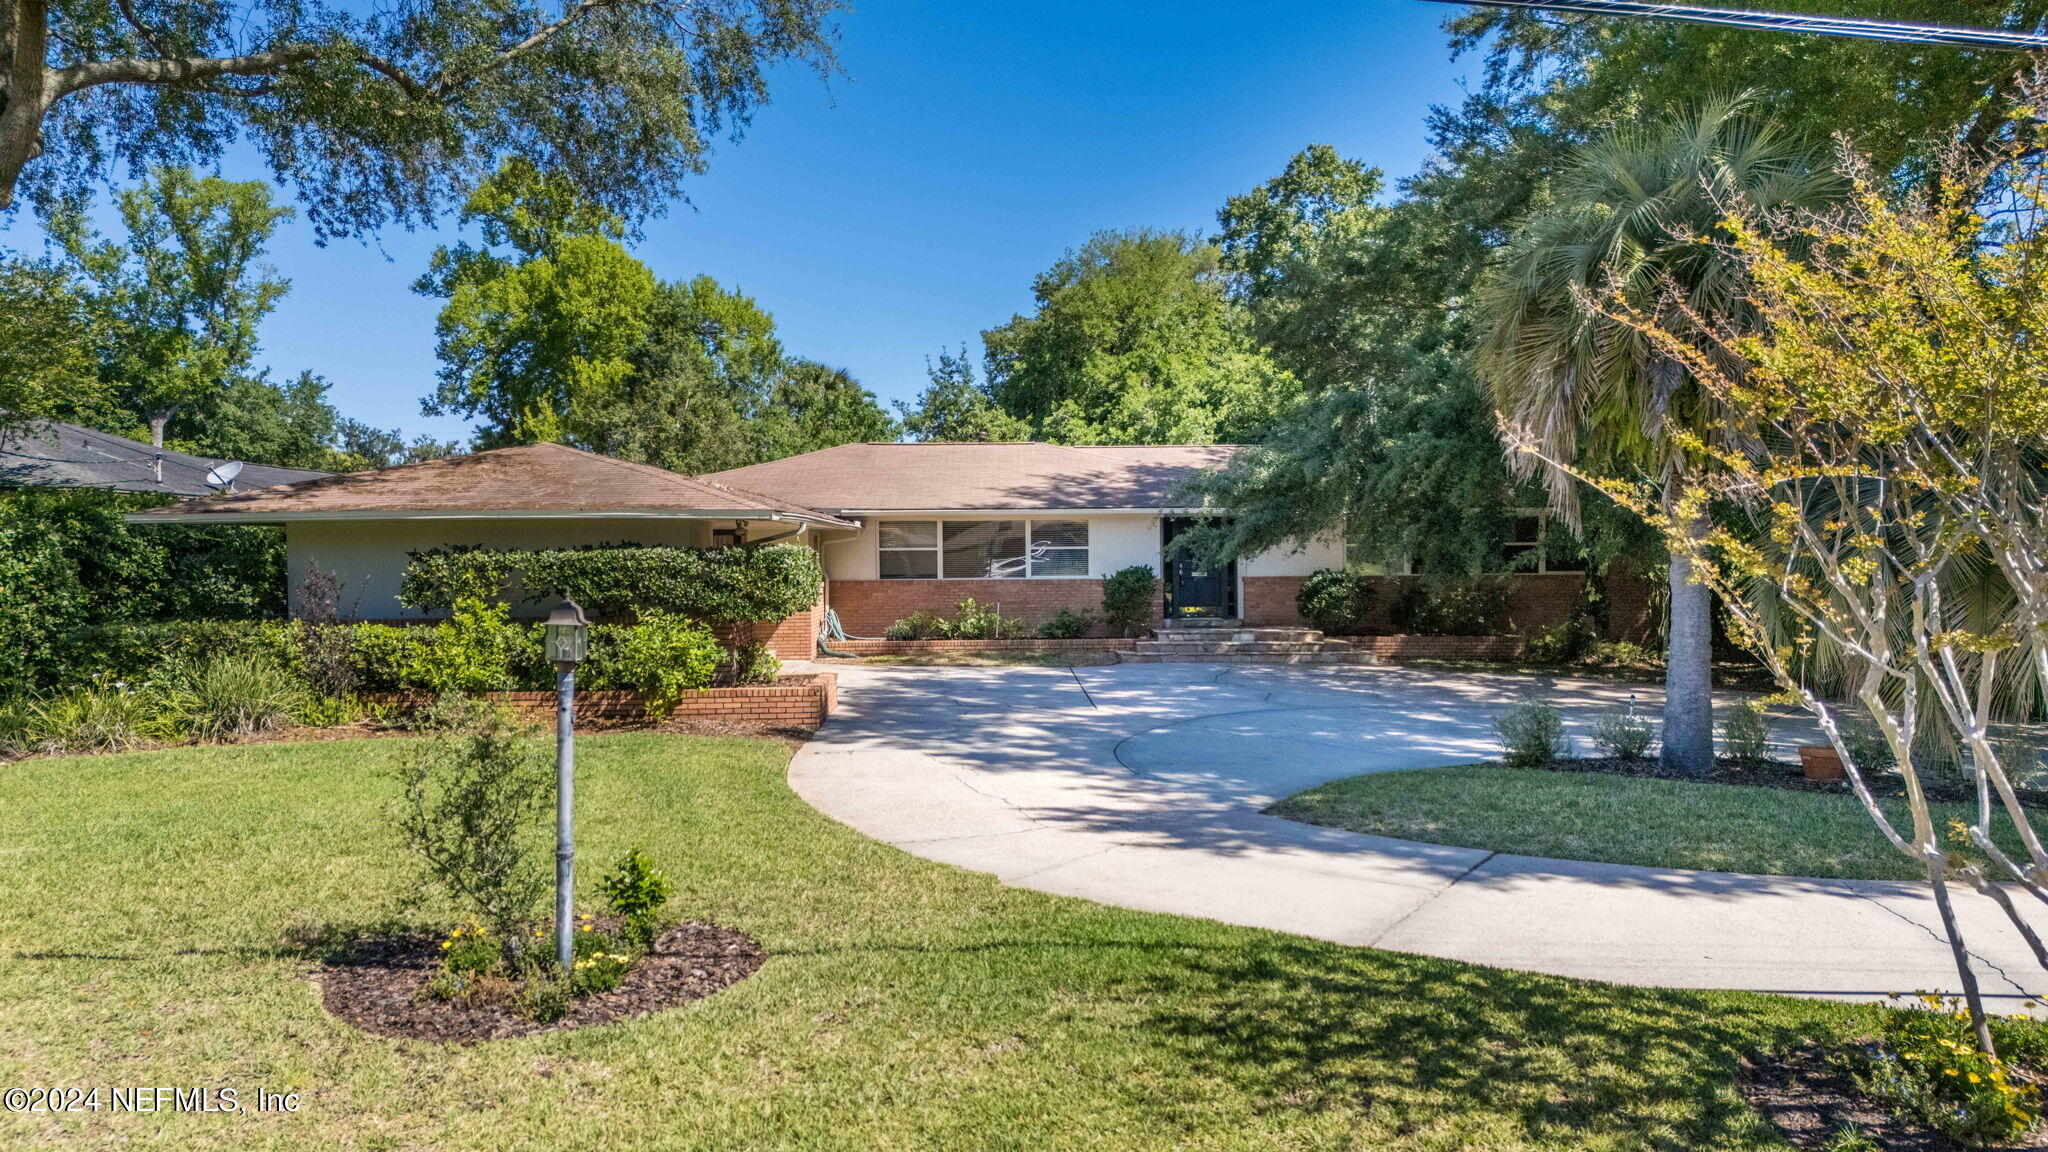 Jacksonville, FL home for sale located at 857 Old Grove Manor, Jacksonville, FL 32207